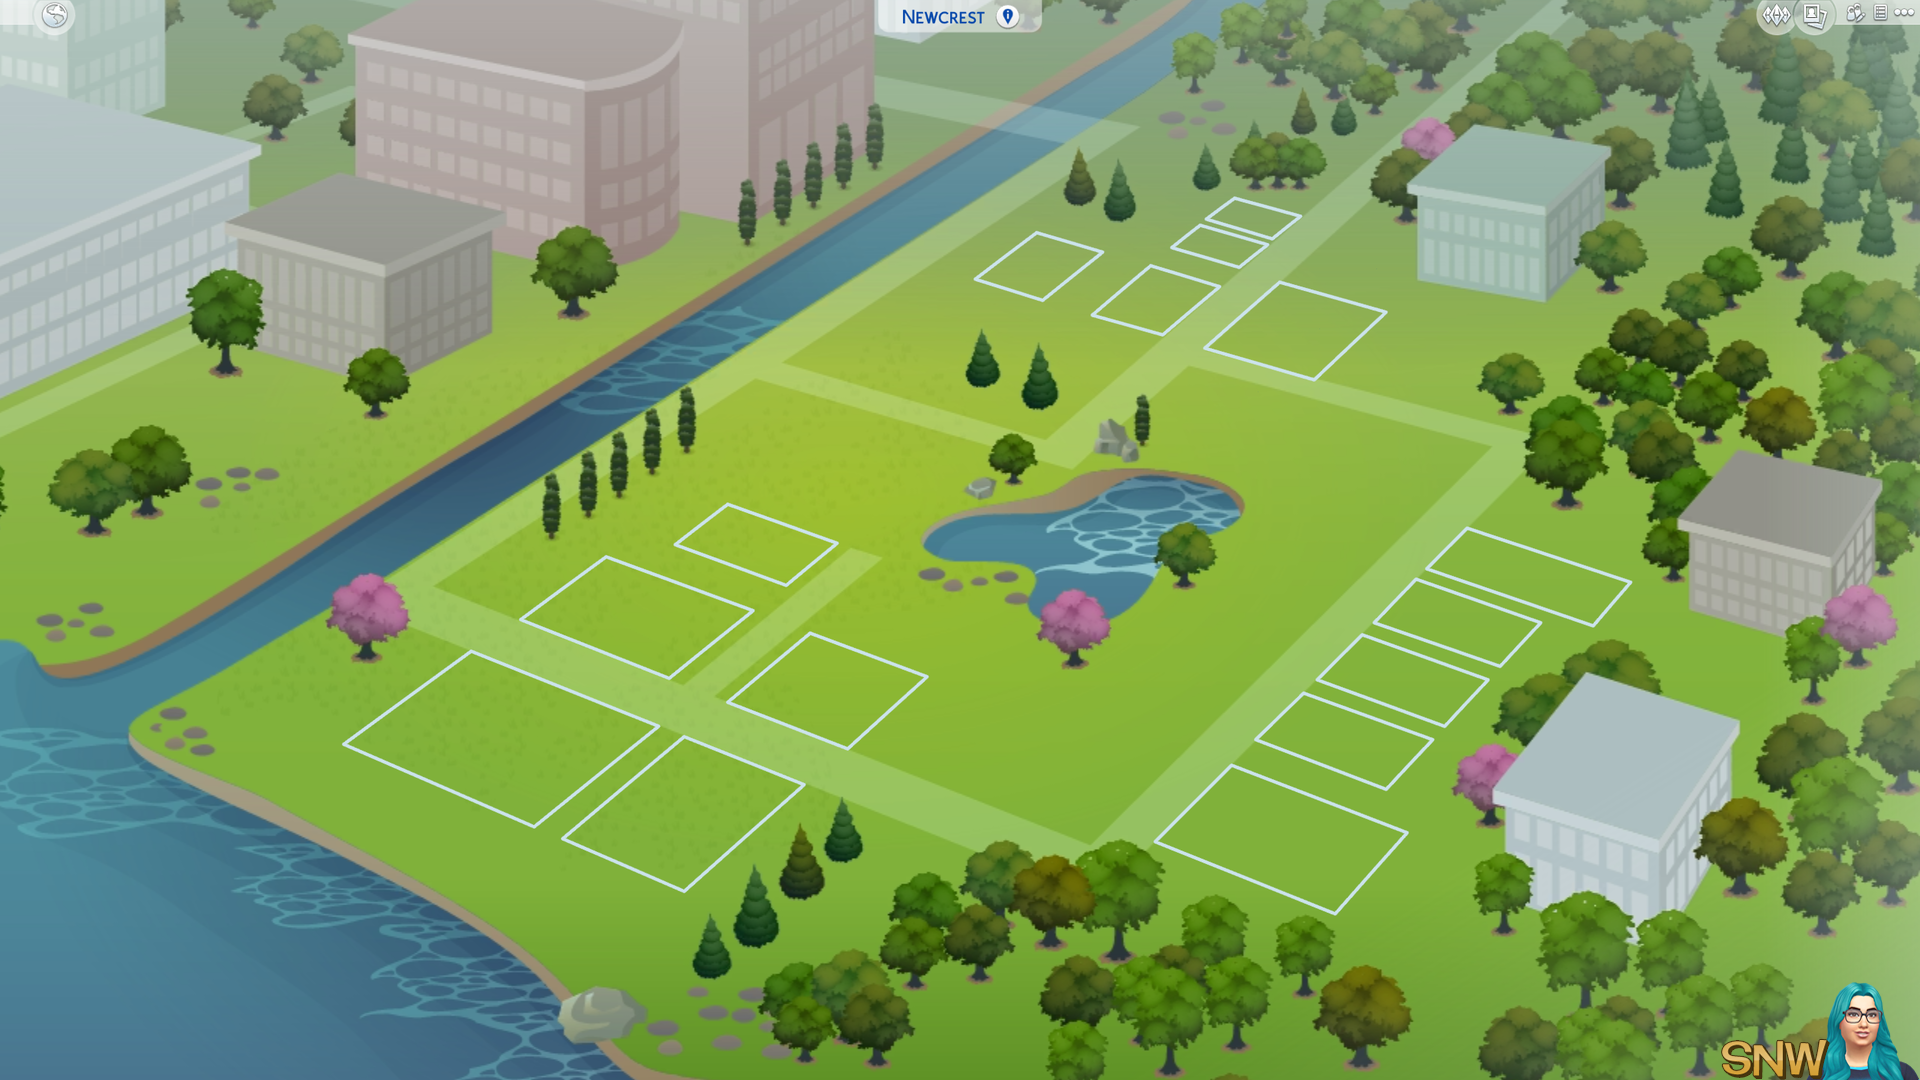 The Sims 4: Newcrest world